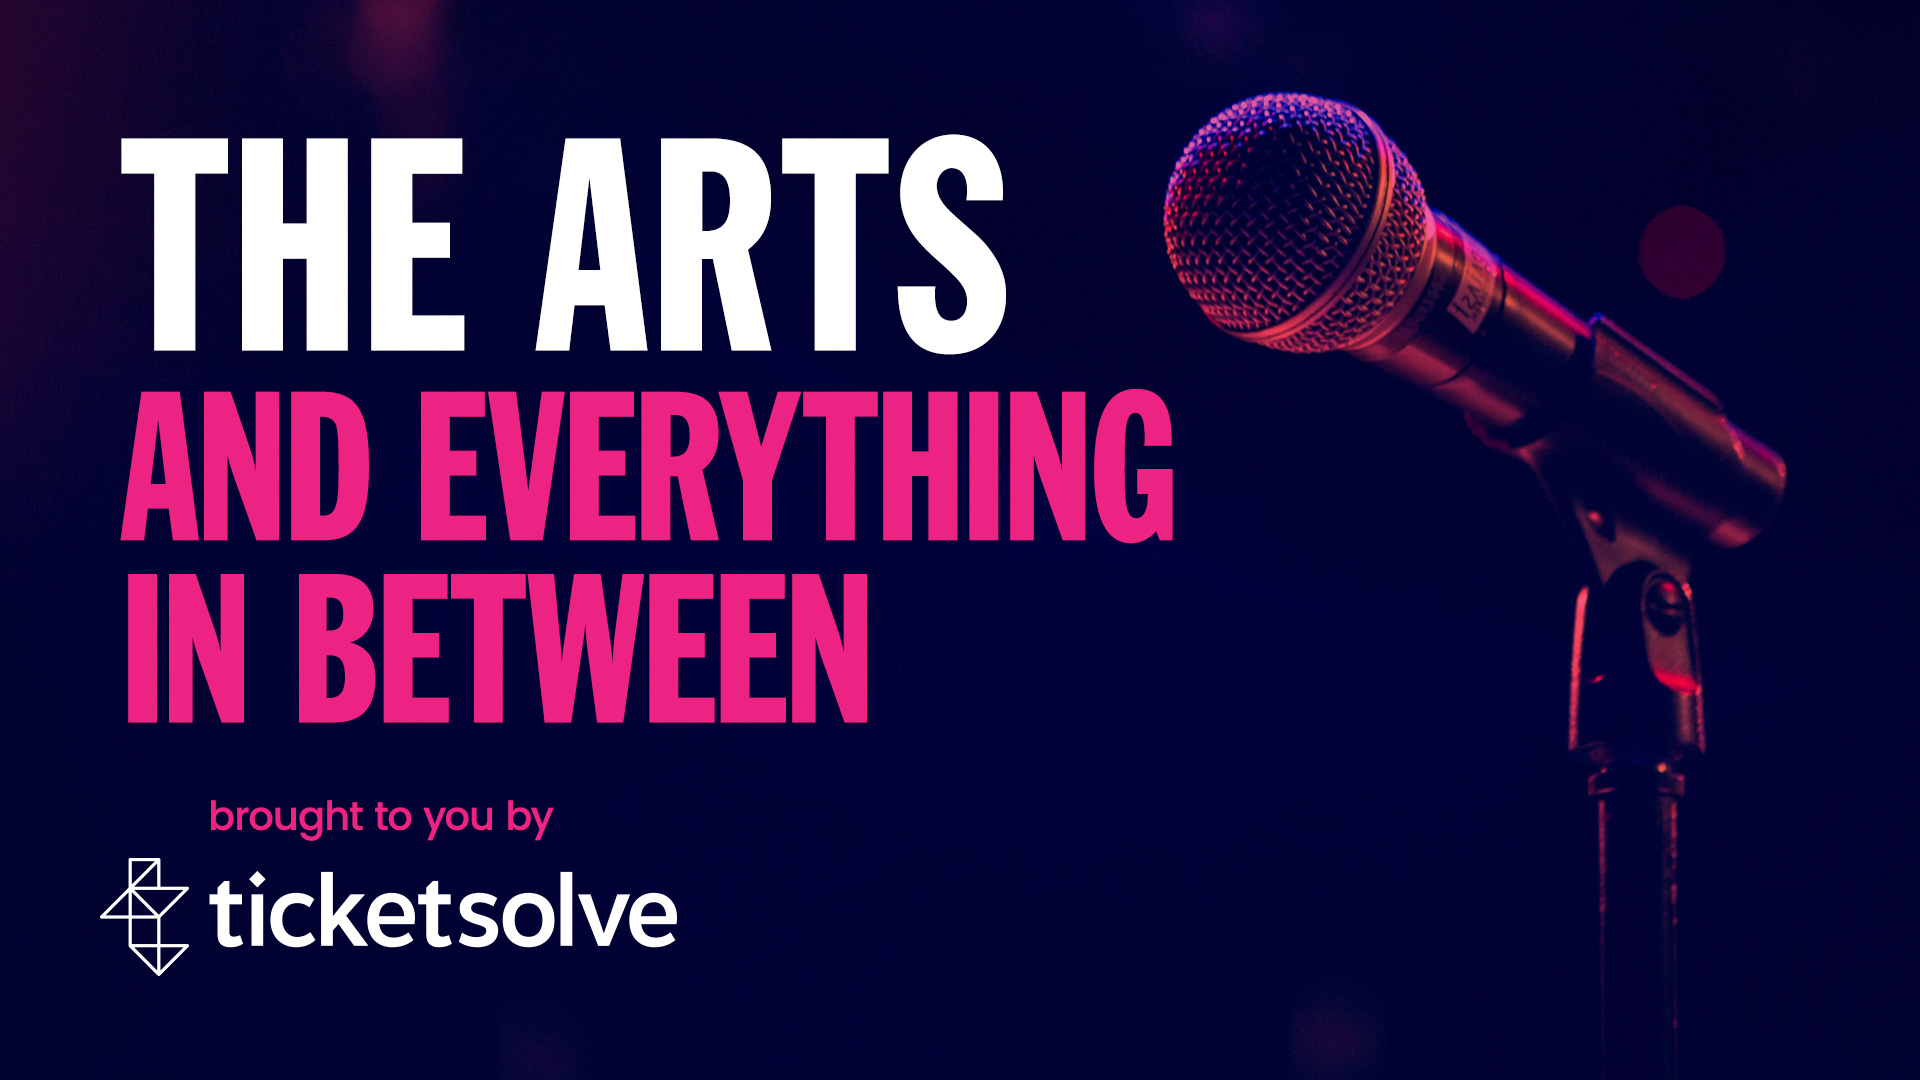 Arts Management and Leadership Podcast: The Arts and Everything in Between